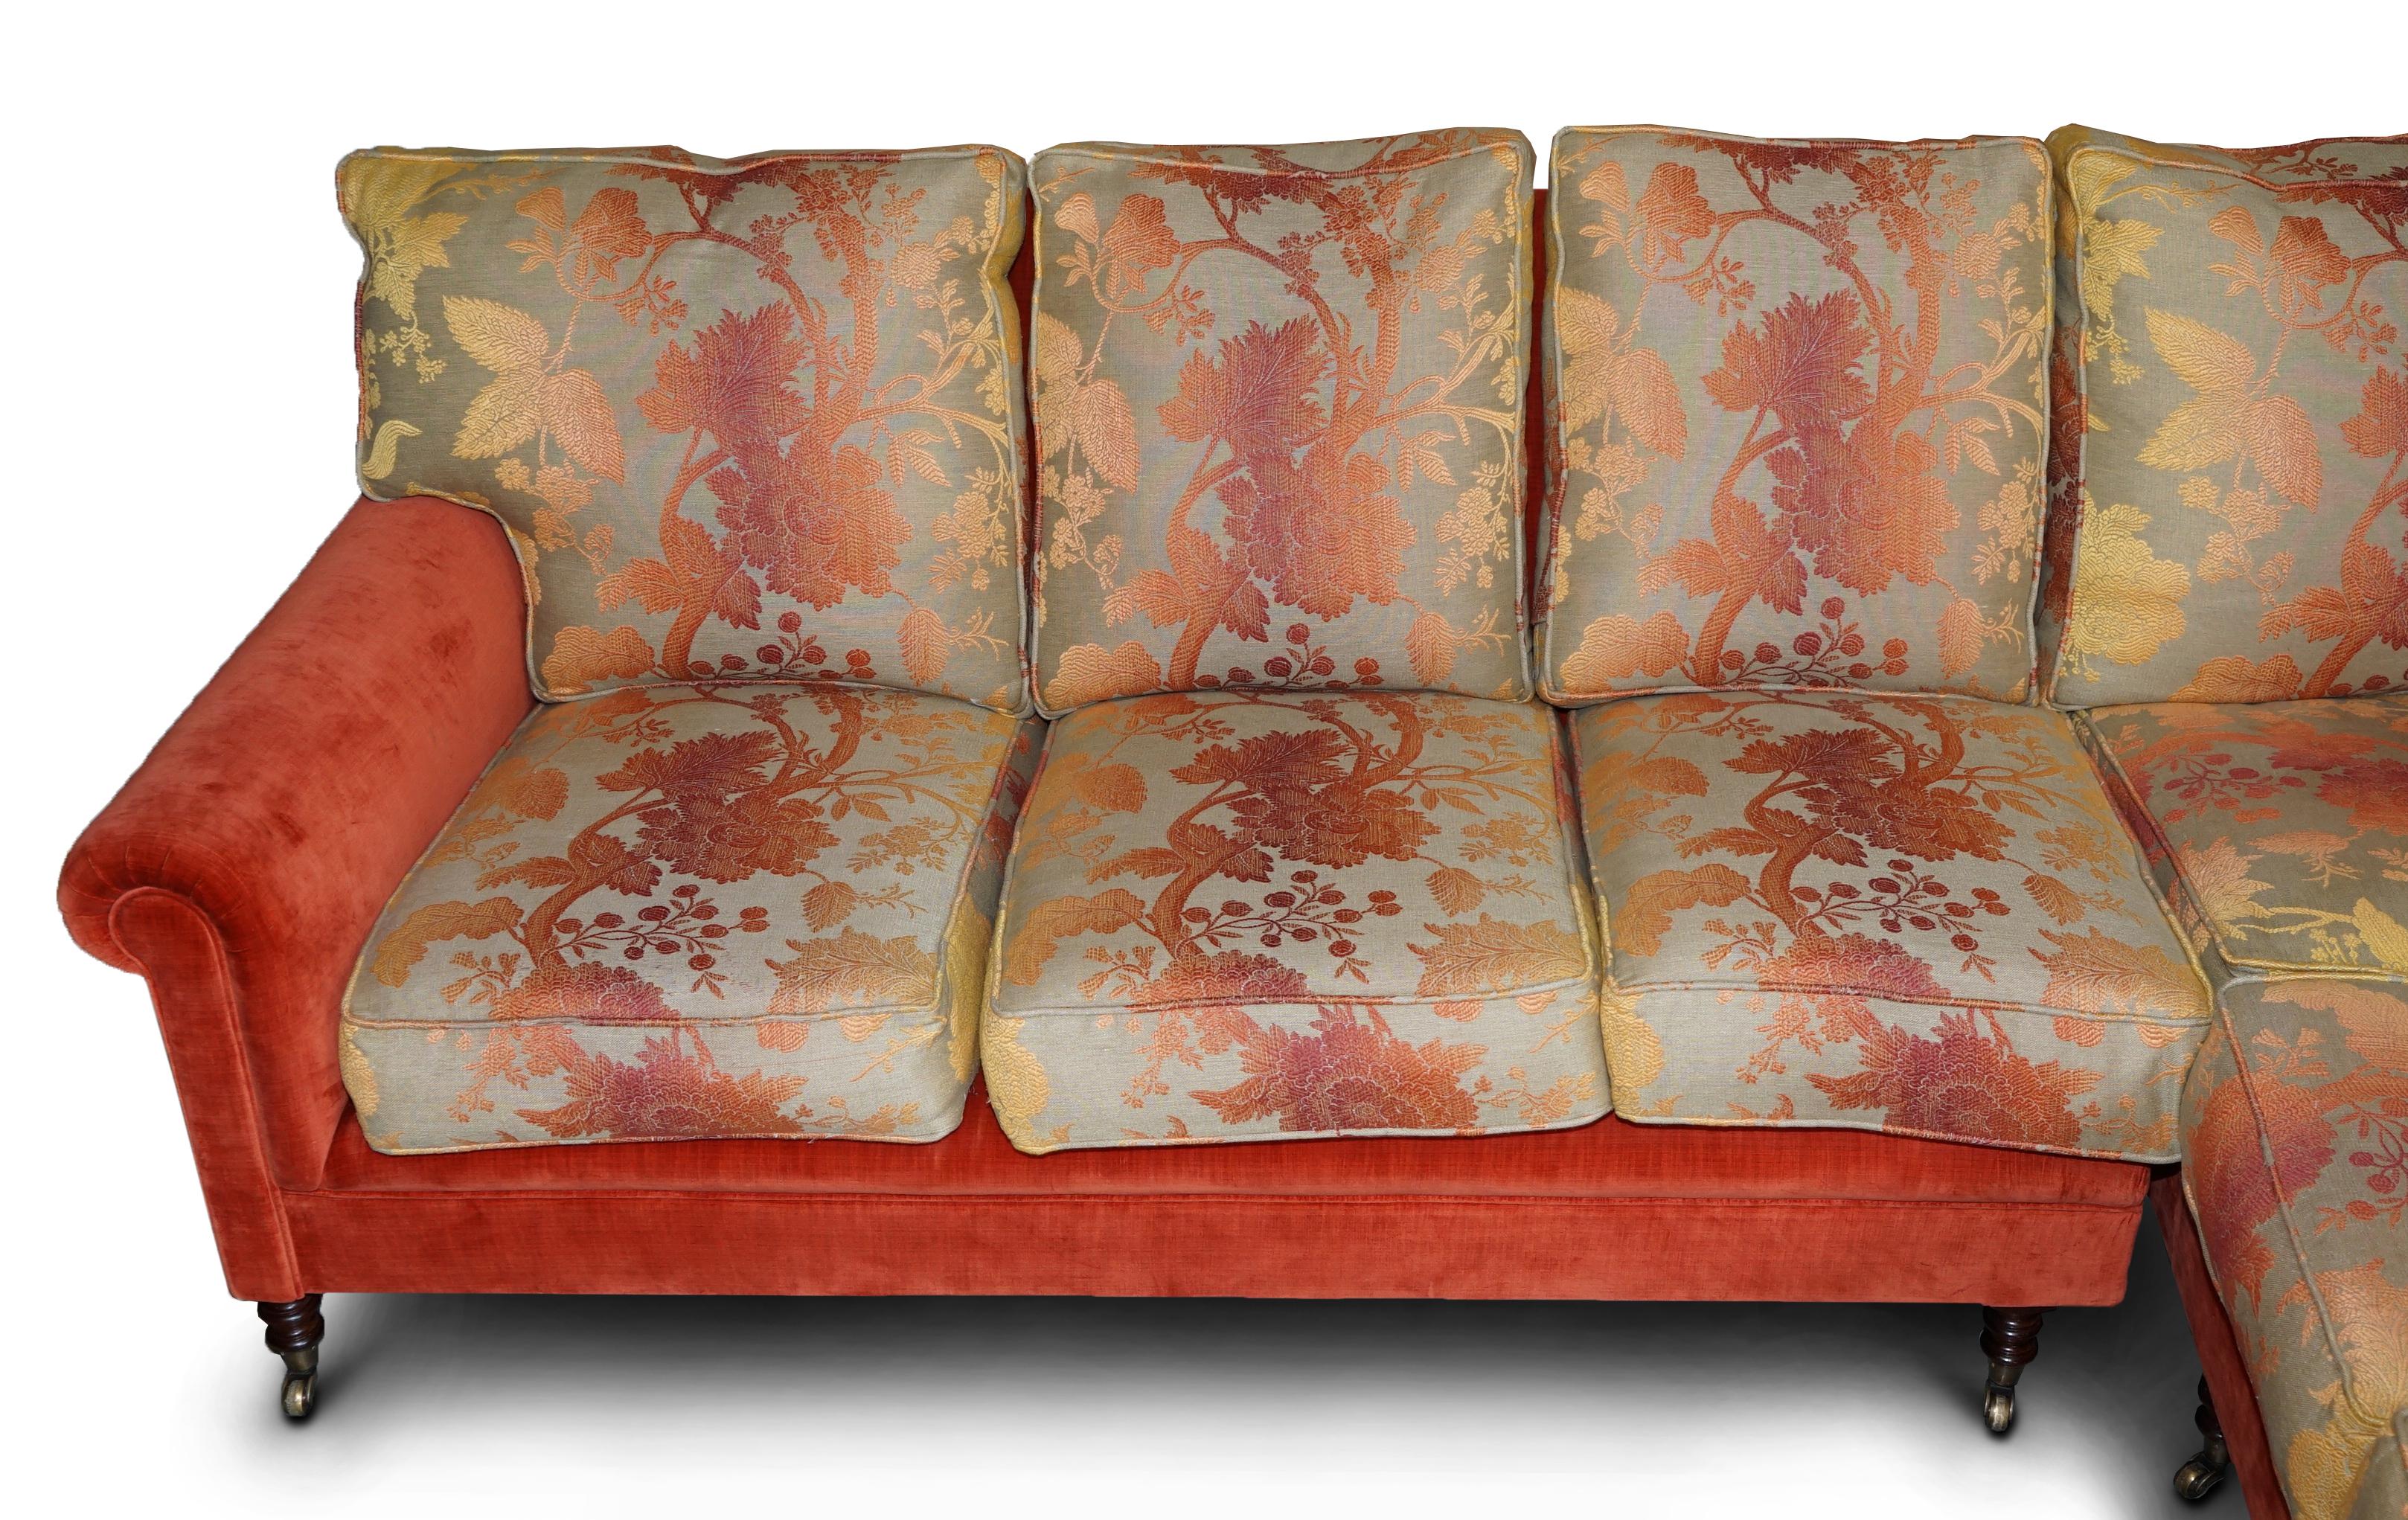 20th Century George Smith Signature Large 7 Seater Corner Sofa with Velour Floral Upholstery For Sale